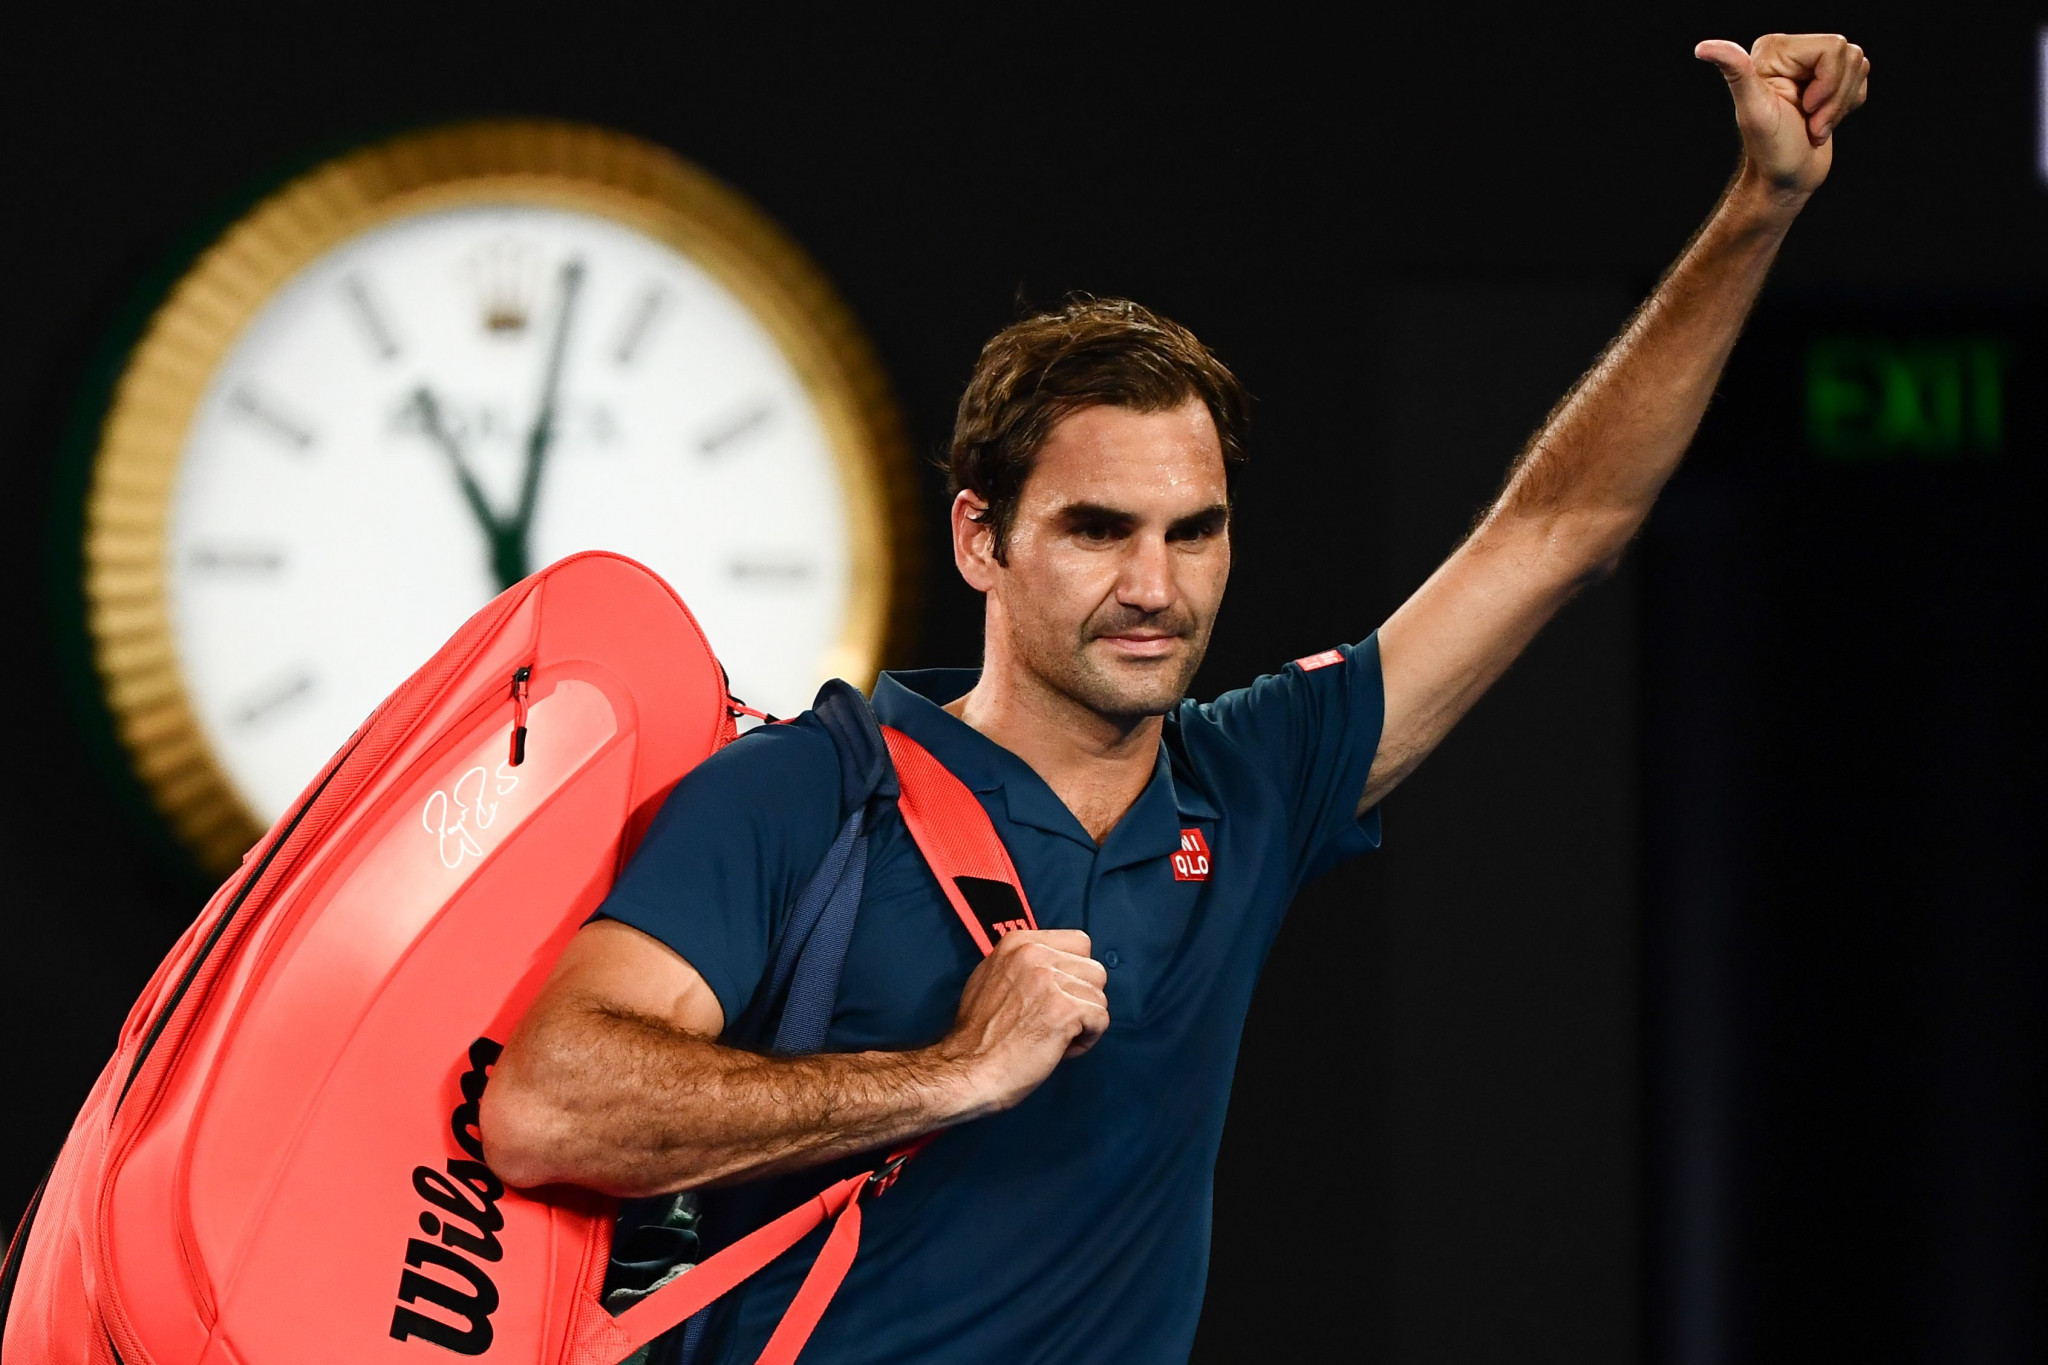 The result ended Roger Federer's hopes of a third consecutive Australian Open title ©Getty Images